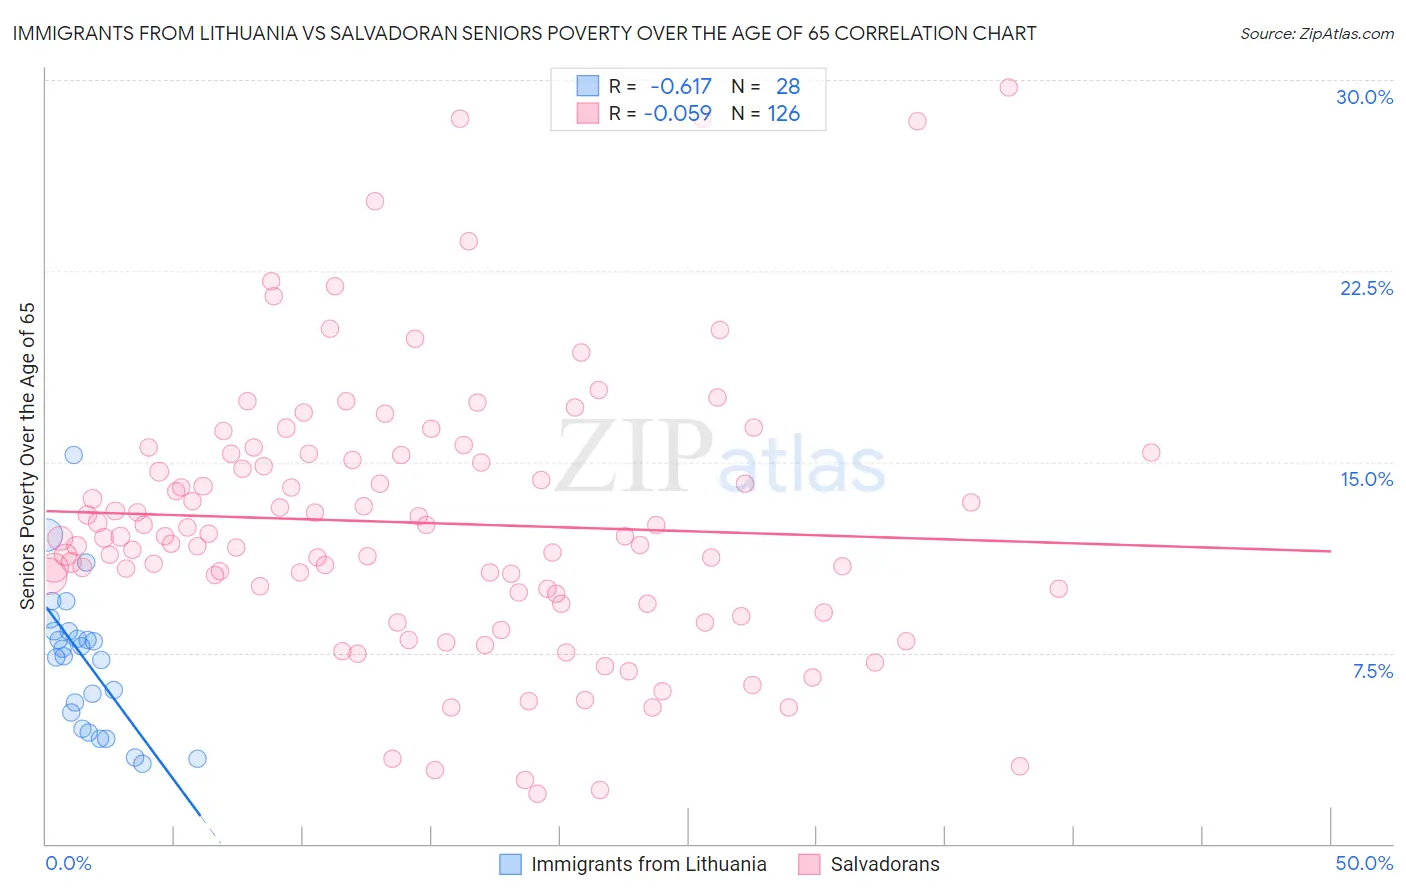 Immigrants from Lithuania vs Salvadoran Seniors Poverty Over the Age of 65